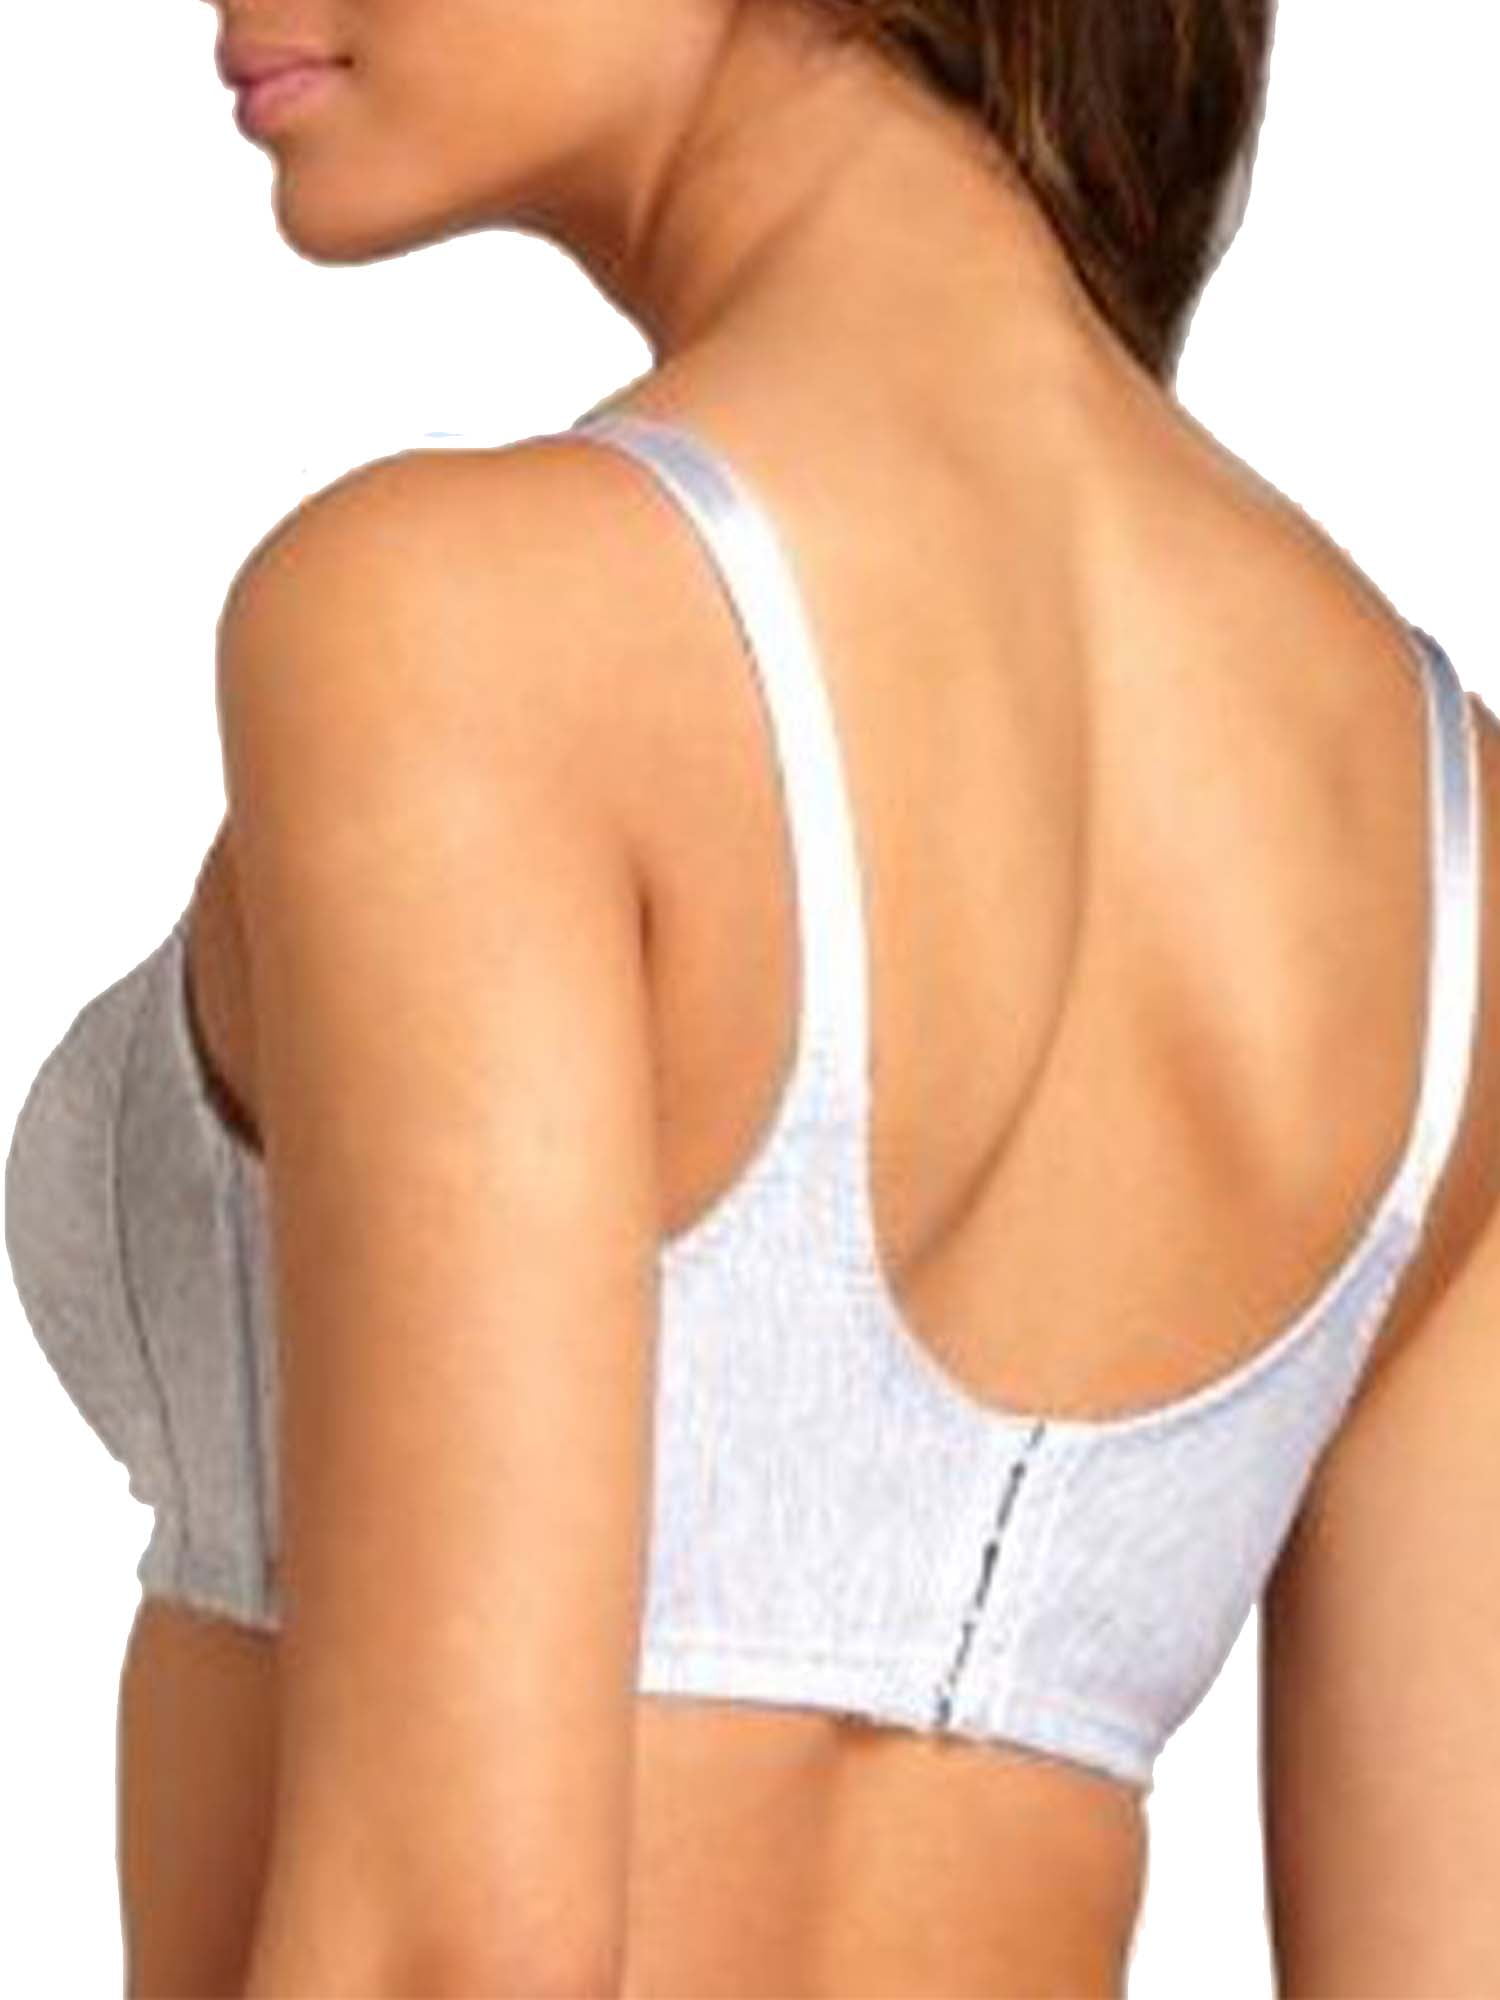 Bali Women's Double-Support Cotton Wire-Free Bra #3036 : :  Clothing, Shoes & Accessories